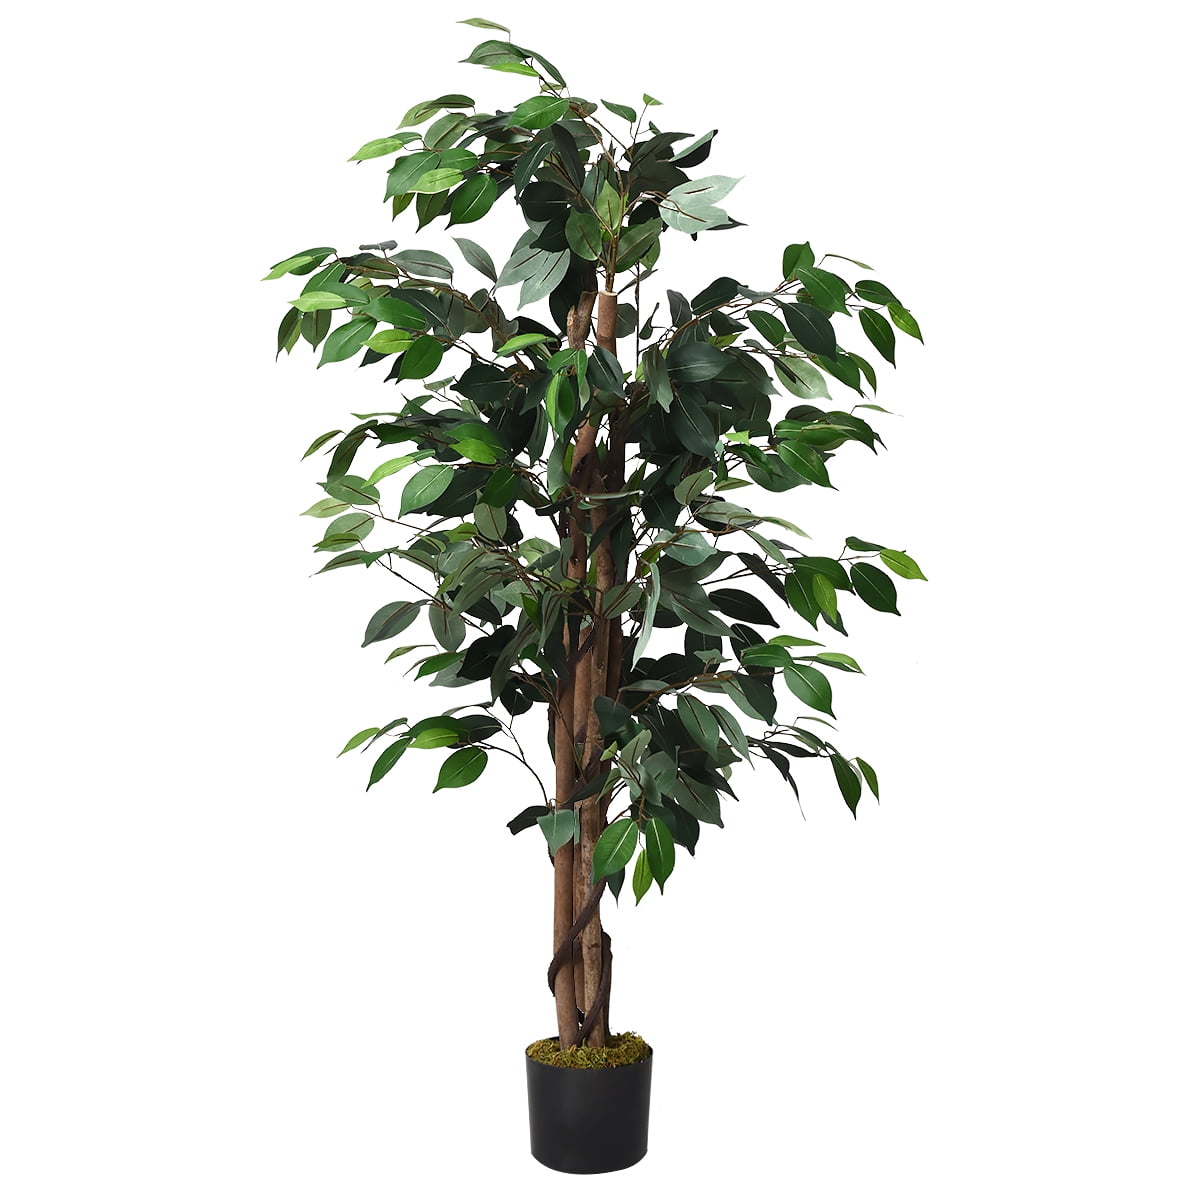 Details about   Artificial Fiscus Tree 5 Ft Fake Plant Home Room Design Indoor Outdoor Garden 